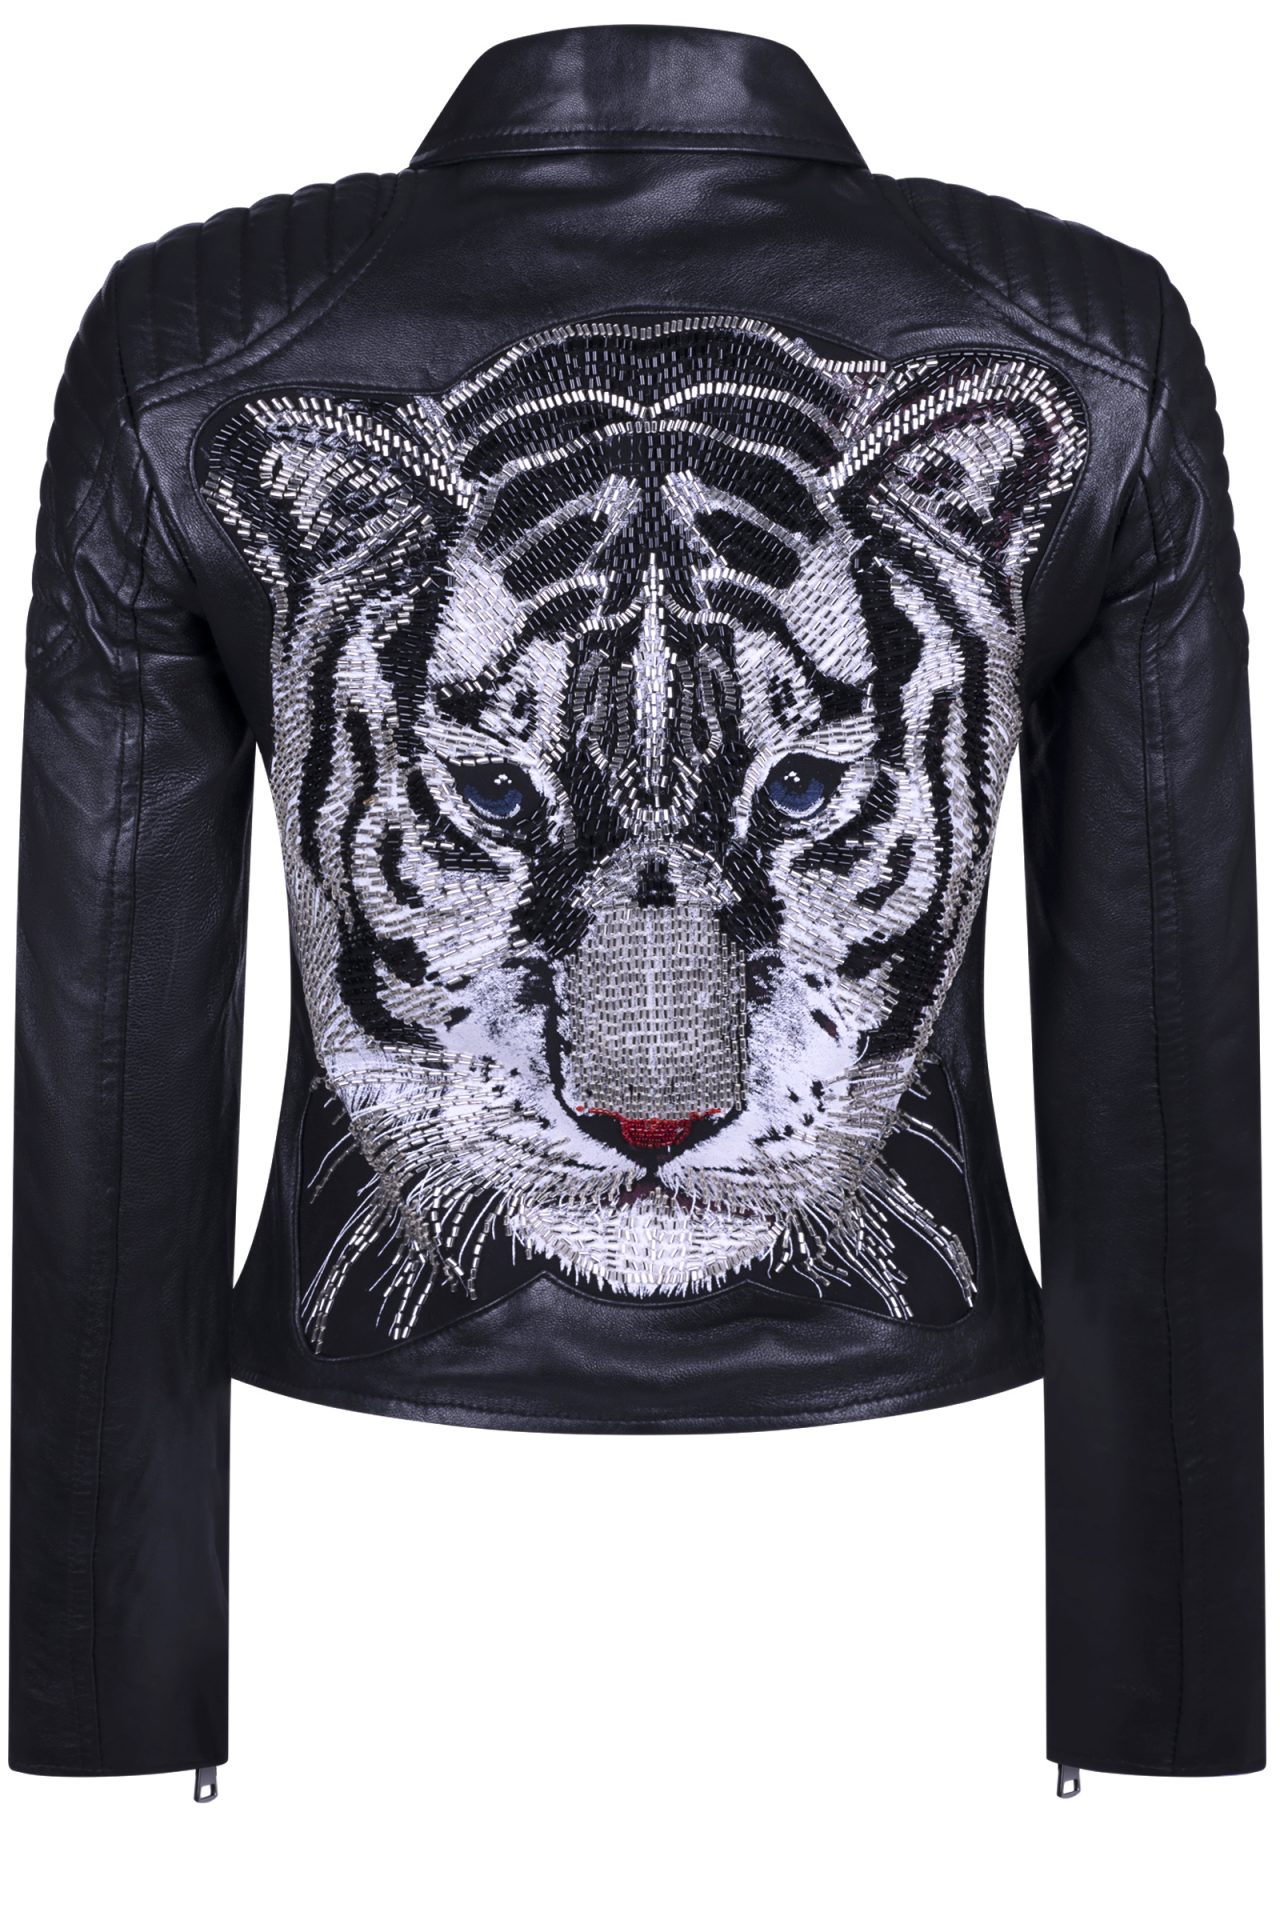 Leather Jacket with Tiger head embroided on back SMJ3 - PS Luxury Leather